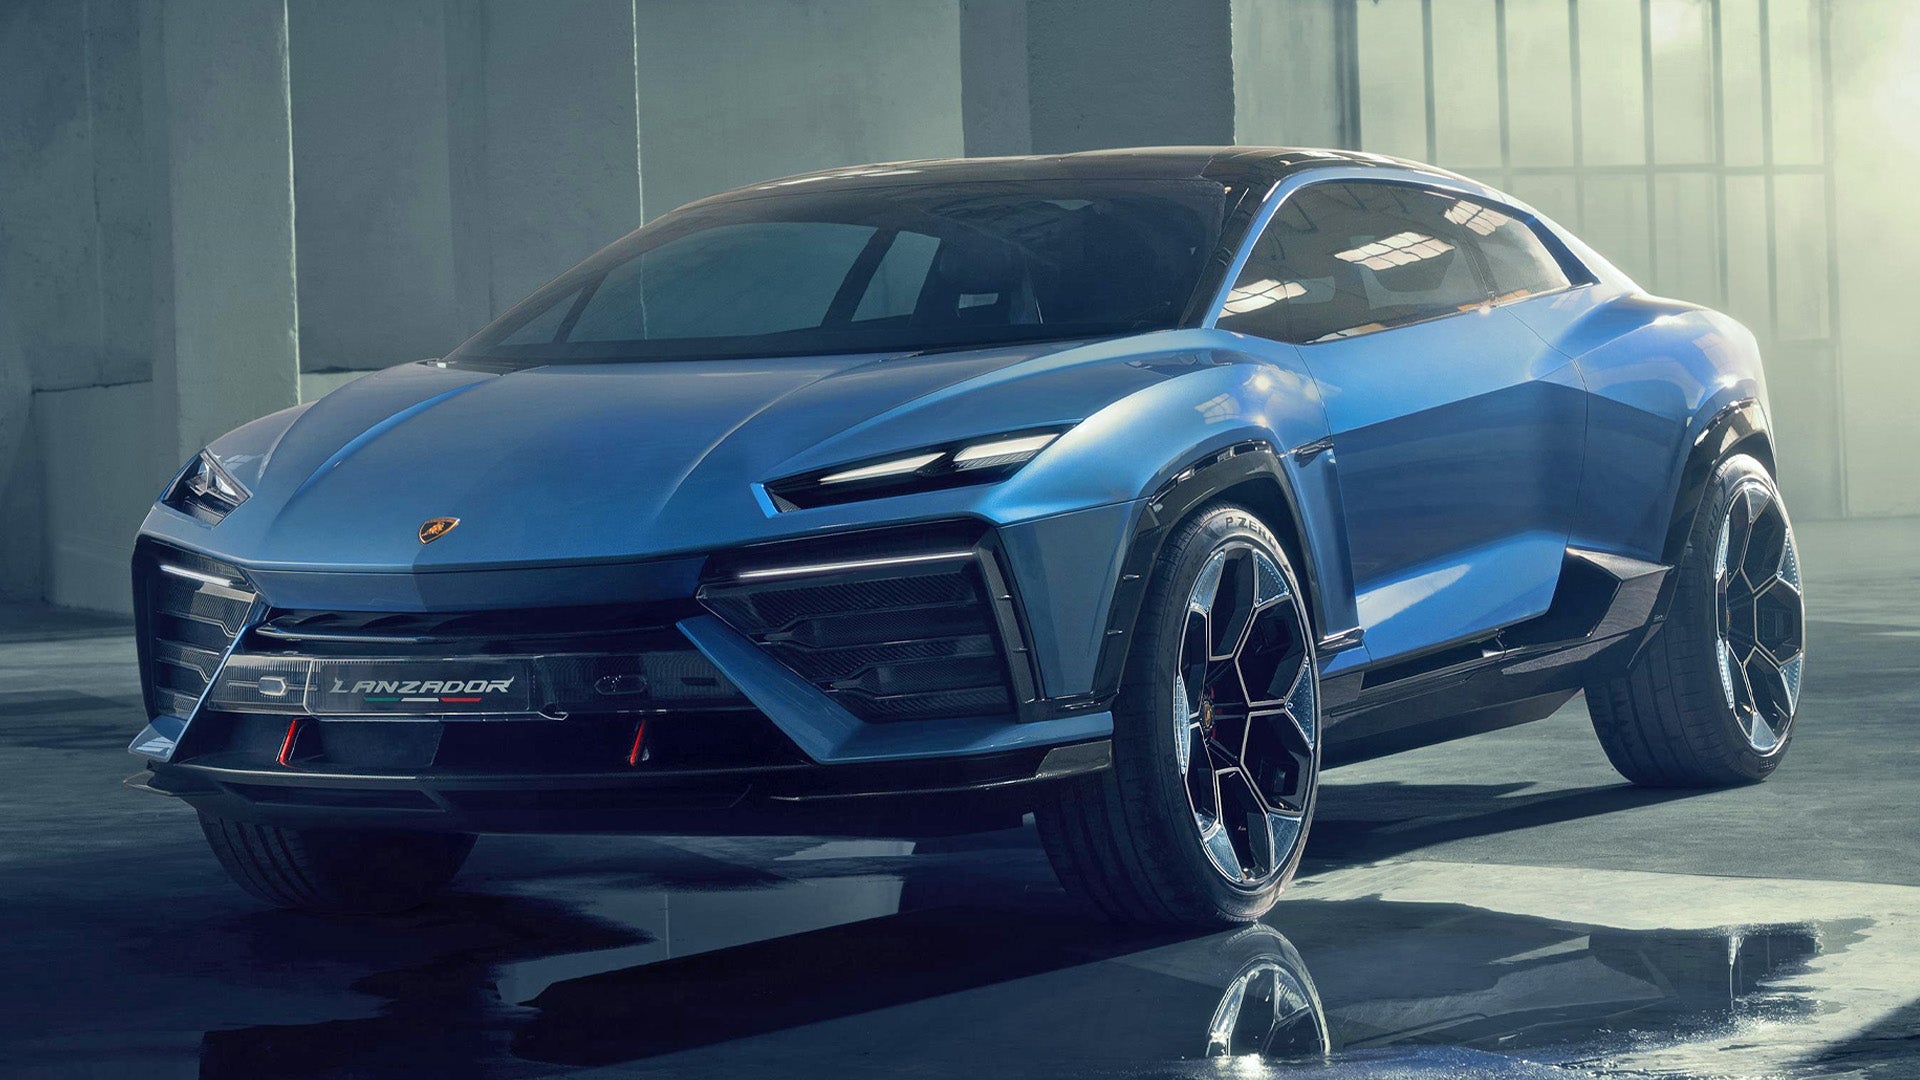 Lamborghini is fervently focused on perfecting the sound of its electric vehicles.